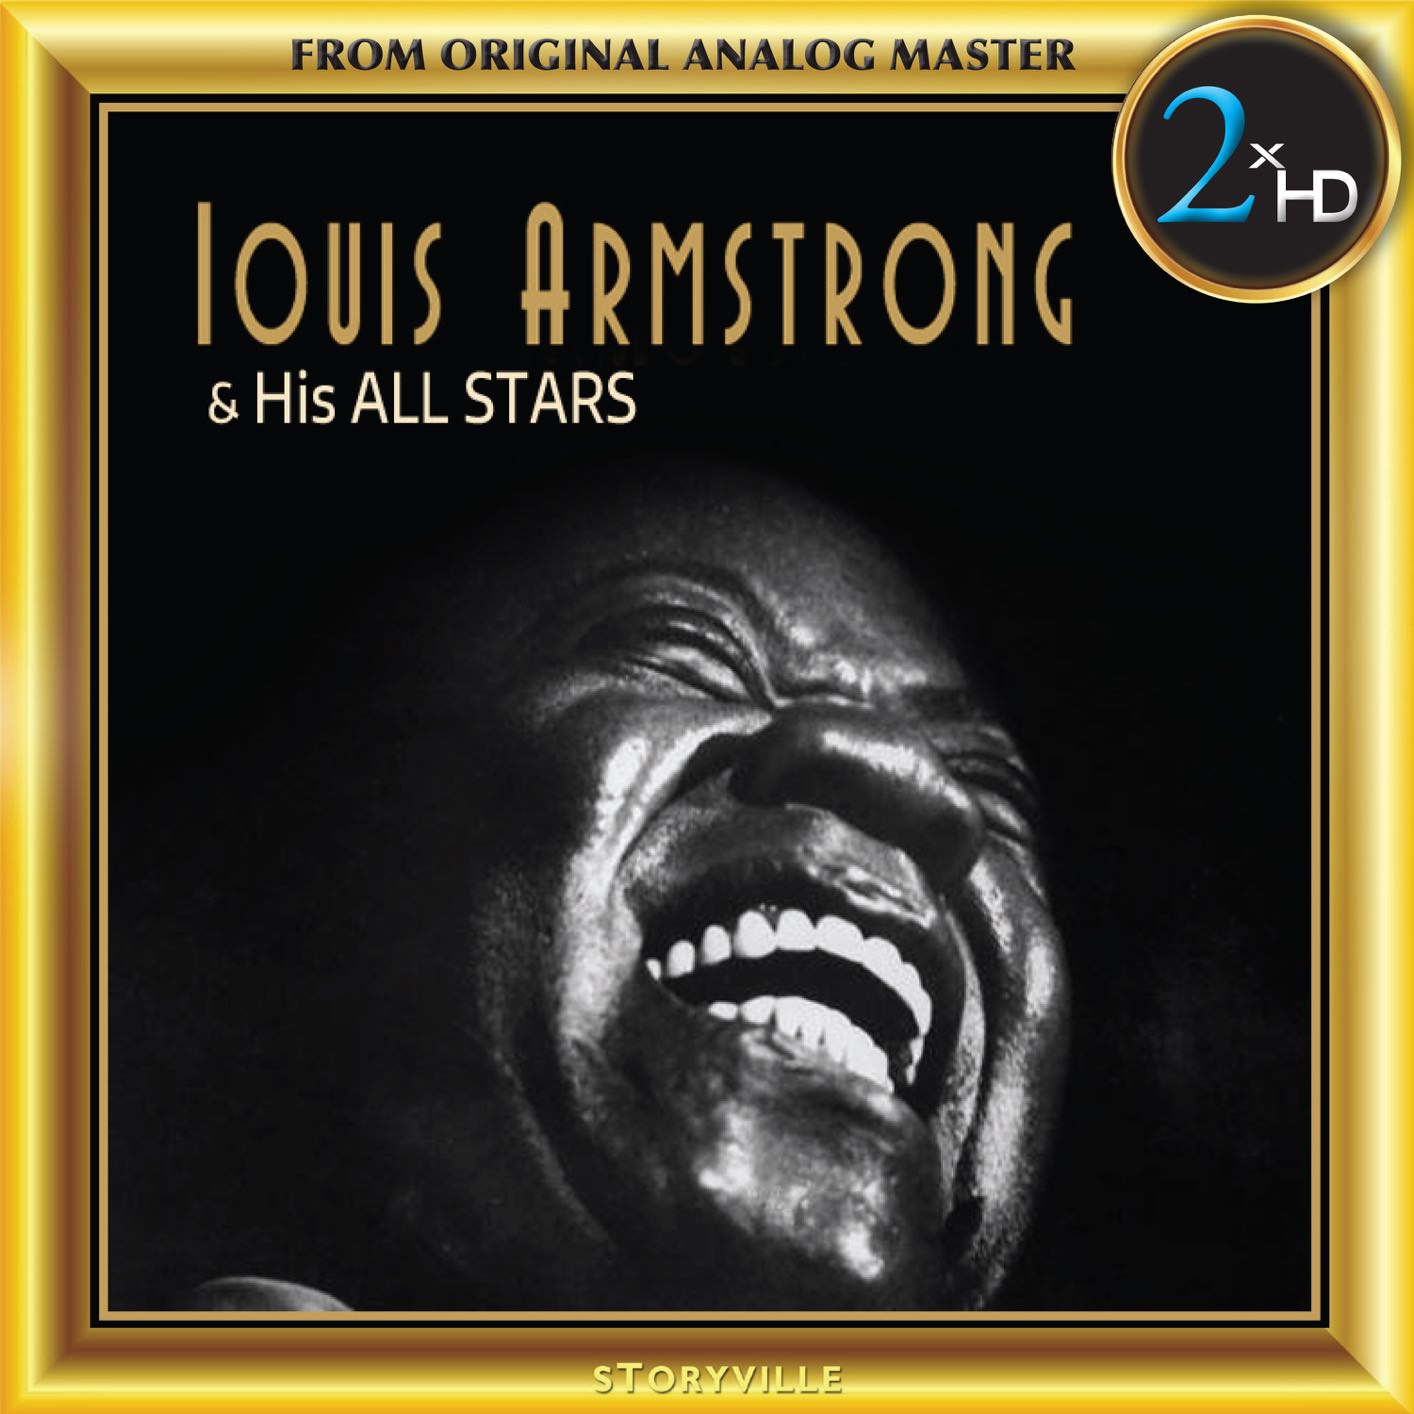 Louis Armstrong – Louis Armstrong & His All Stars (1954/2018) [FLAC 24bit/192kHz]